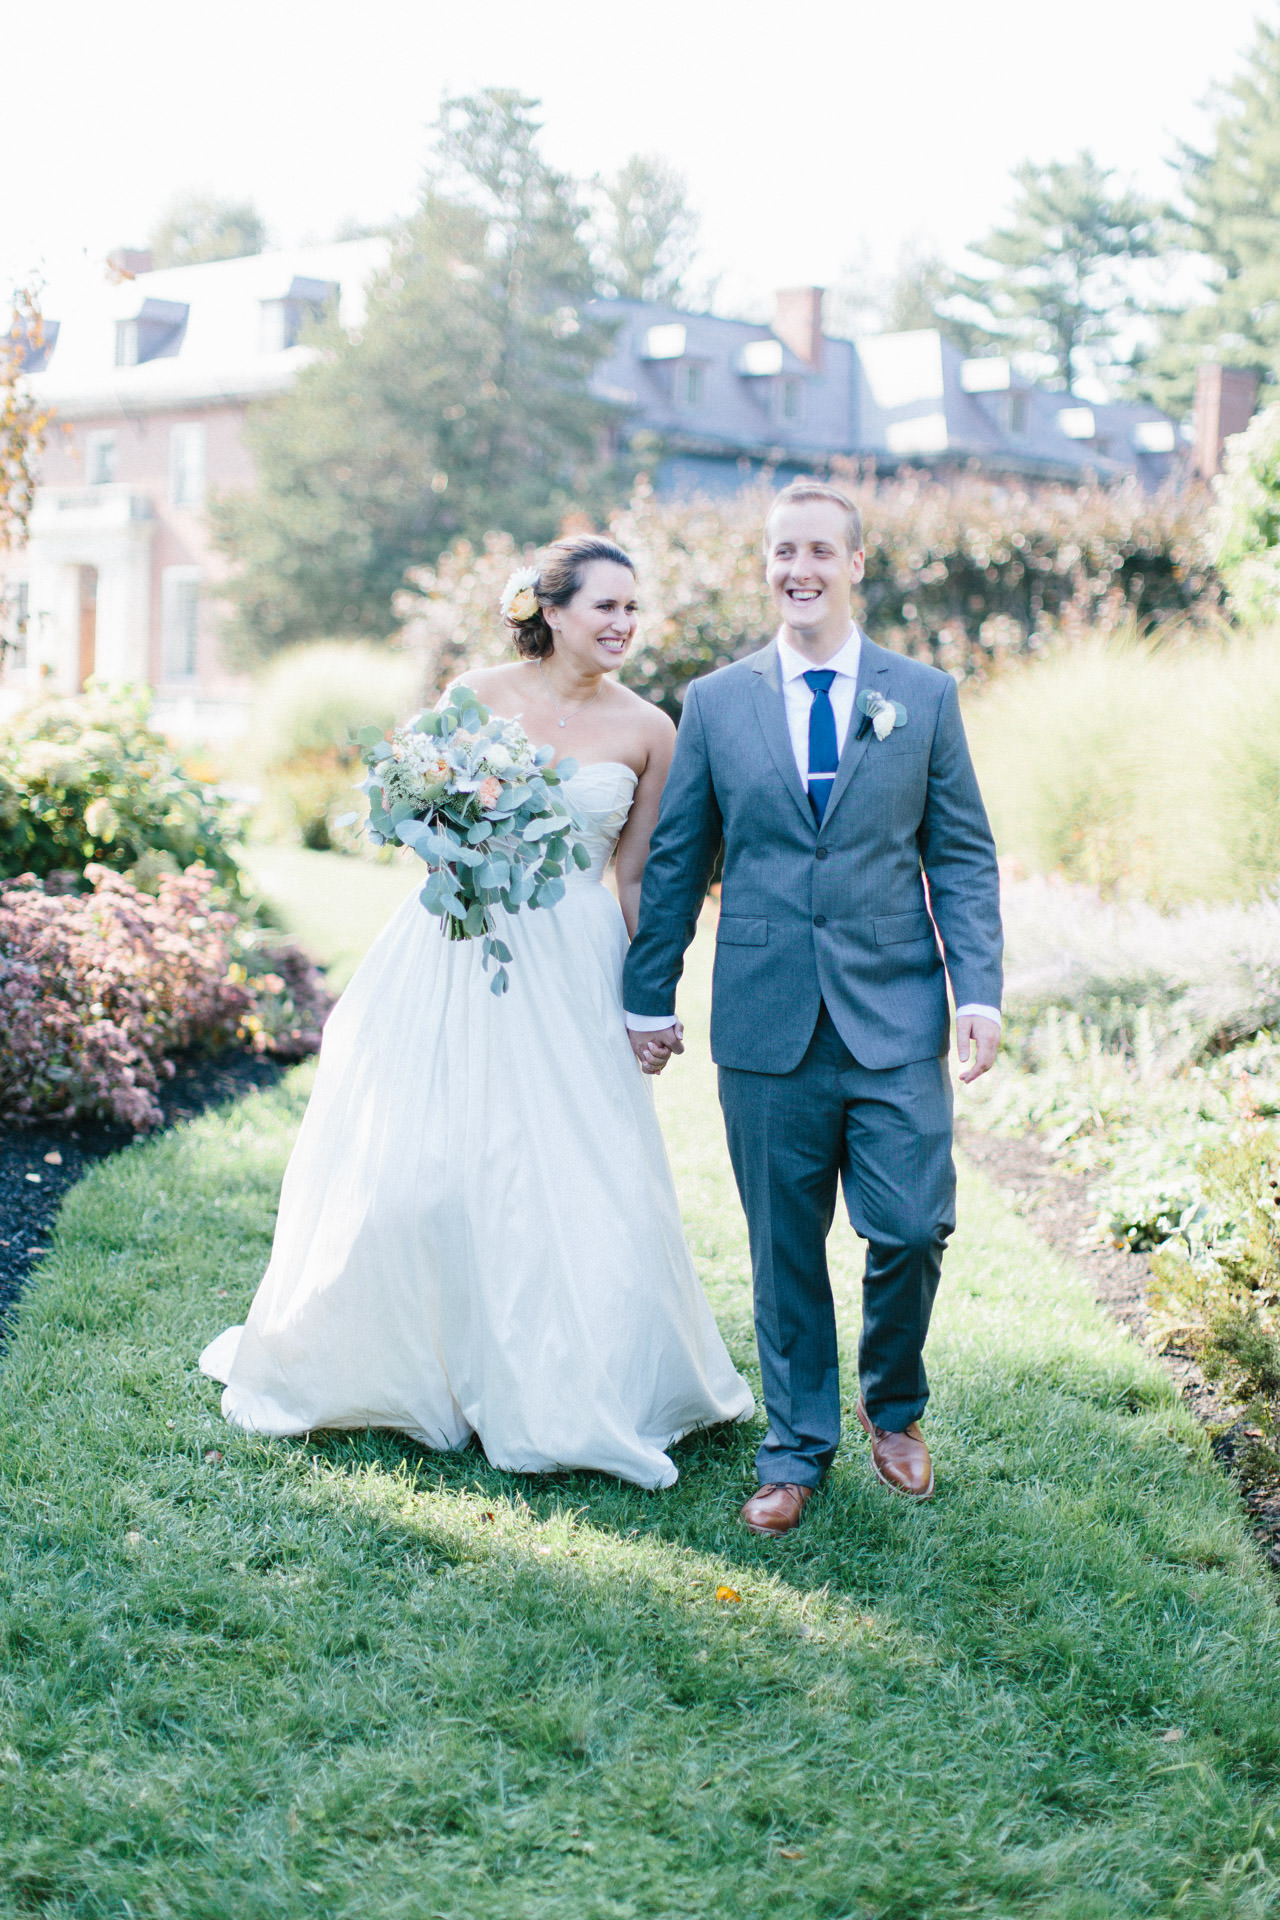 Bride and Groom smiling and walking in a garden